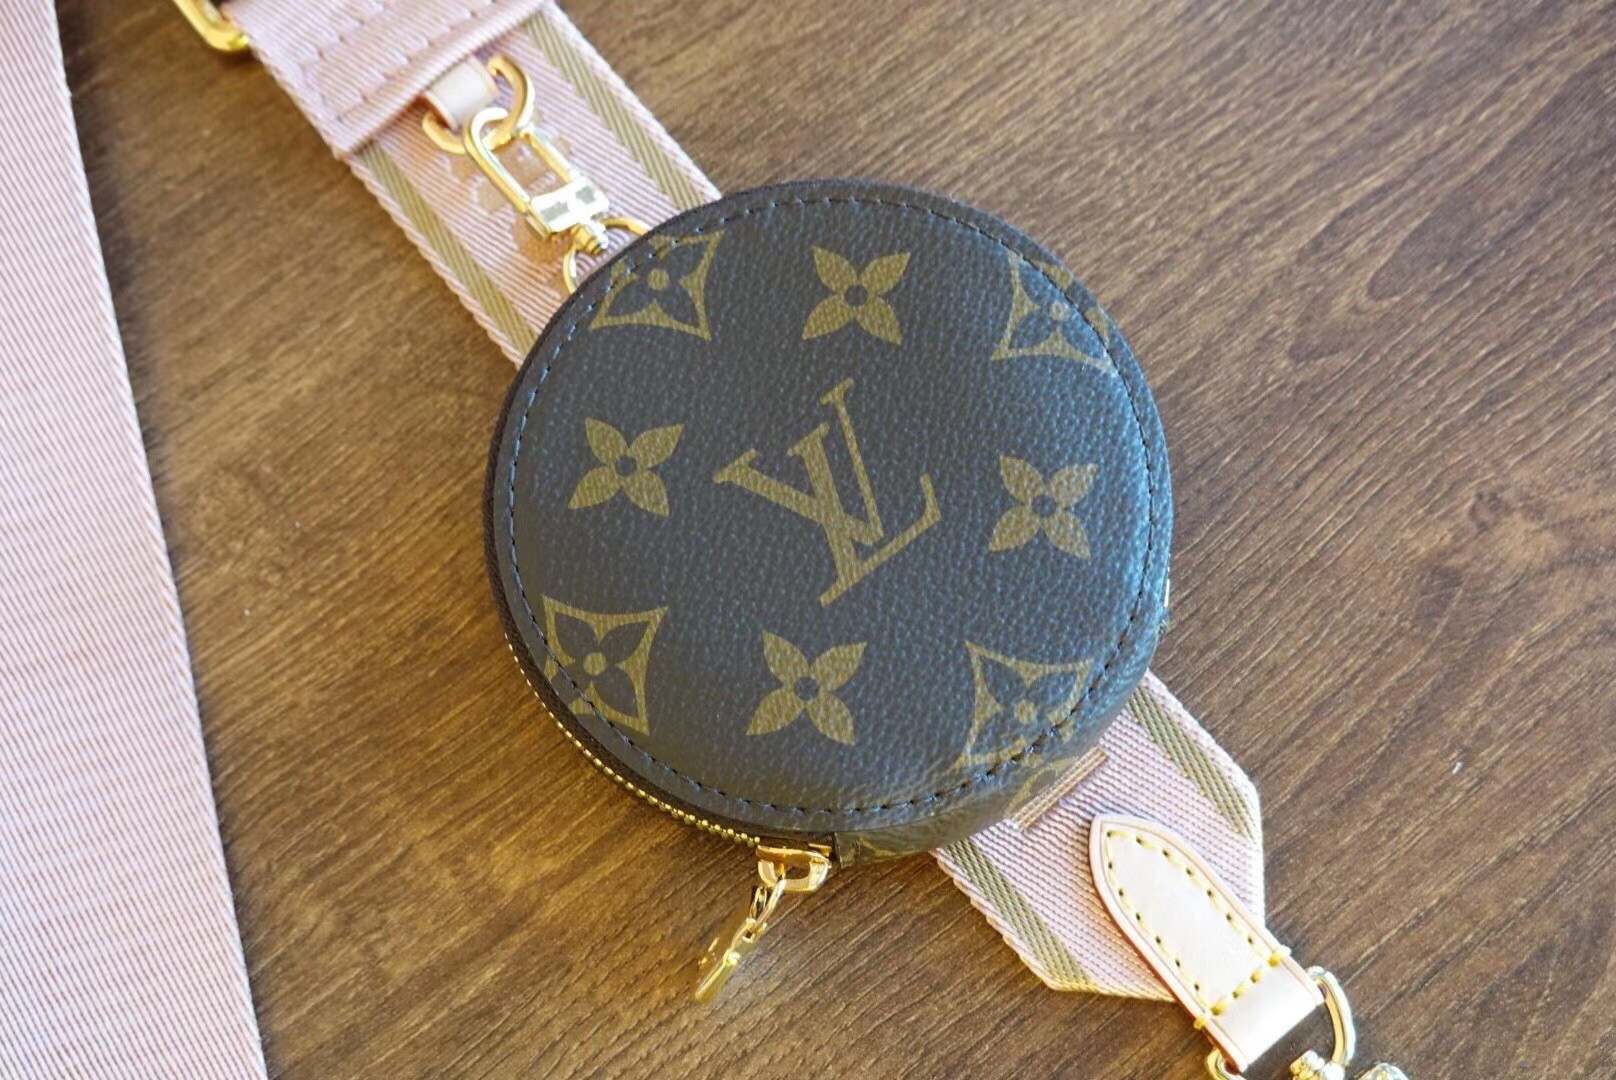 M57285 Louis Vuitton Monogram Tapestry Keepall Bandouliere 50